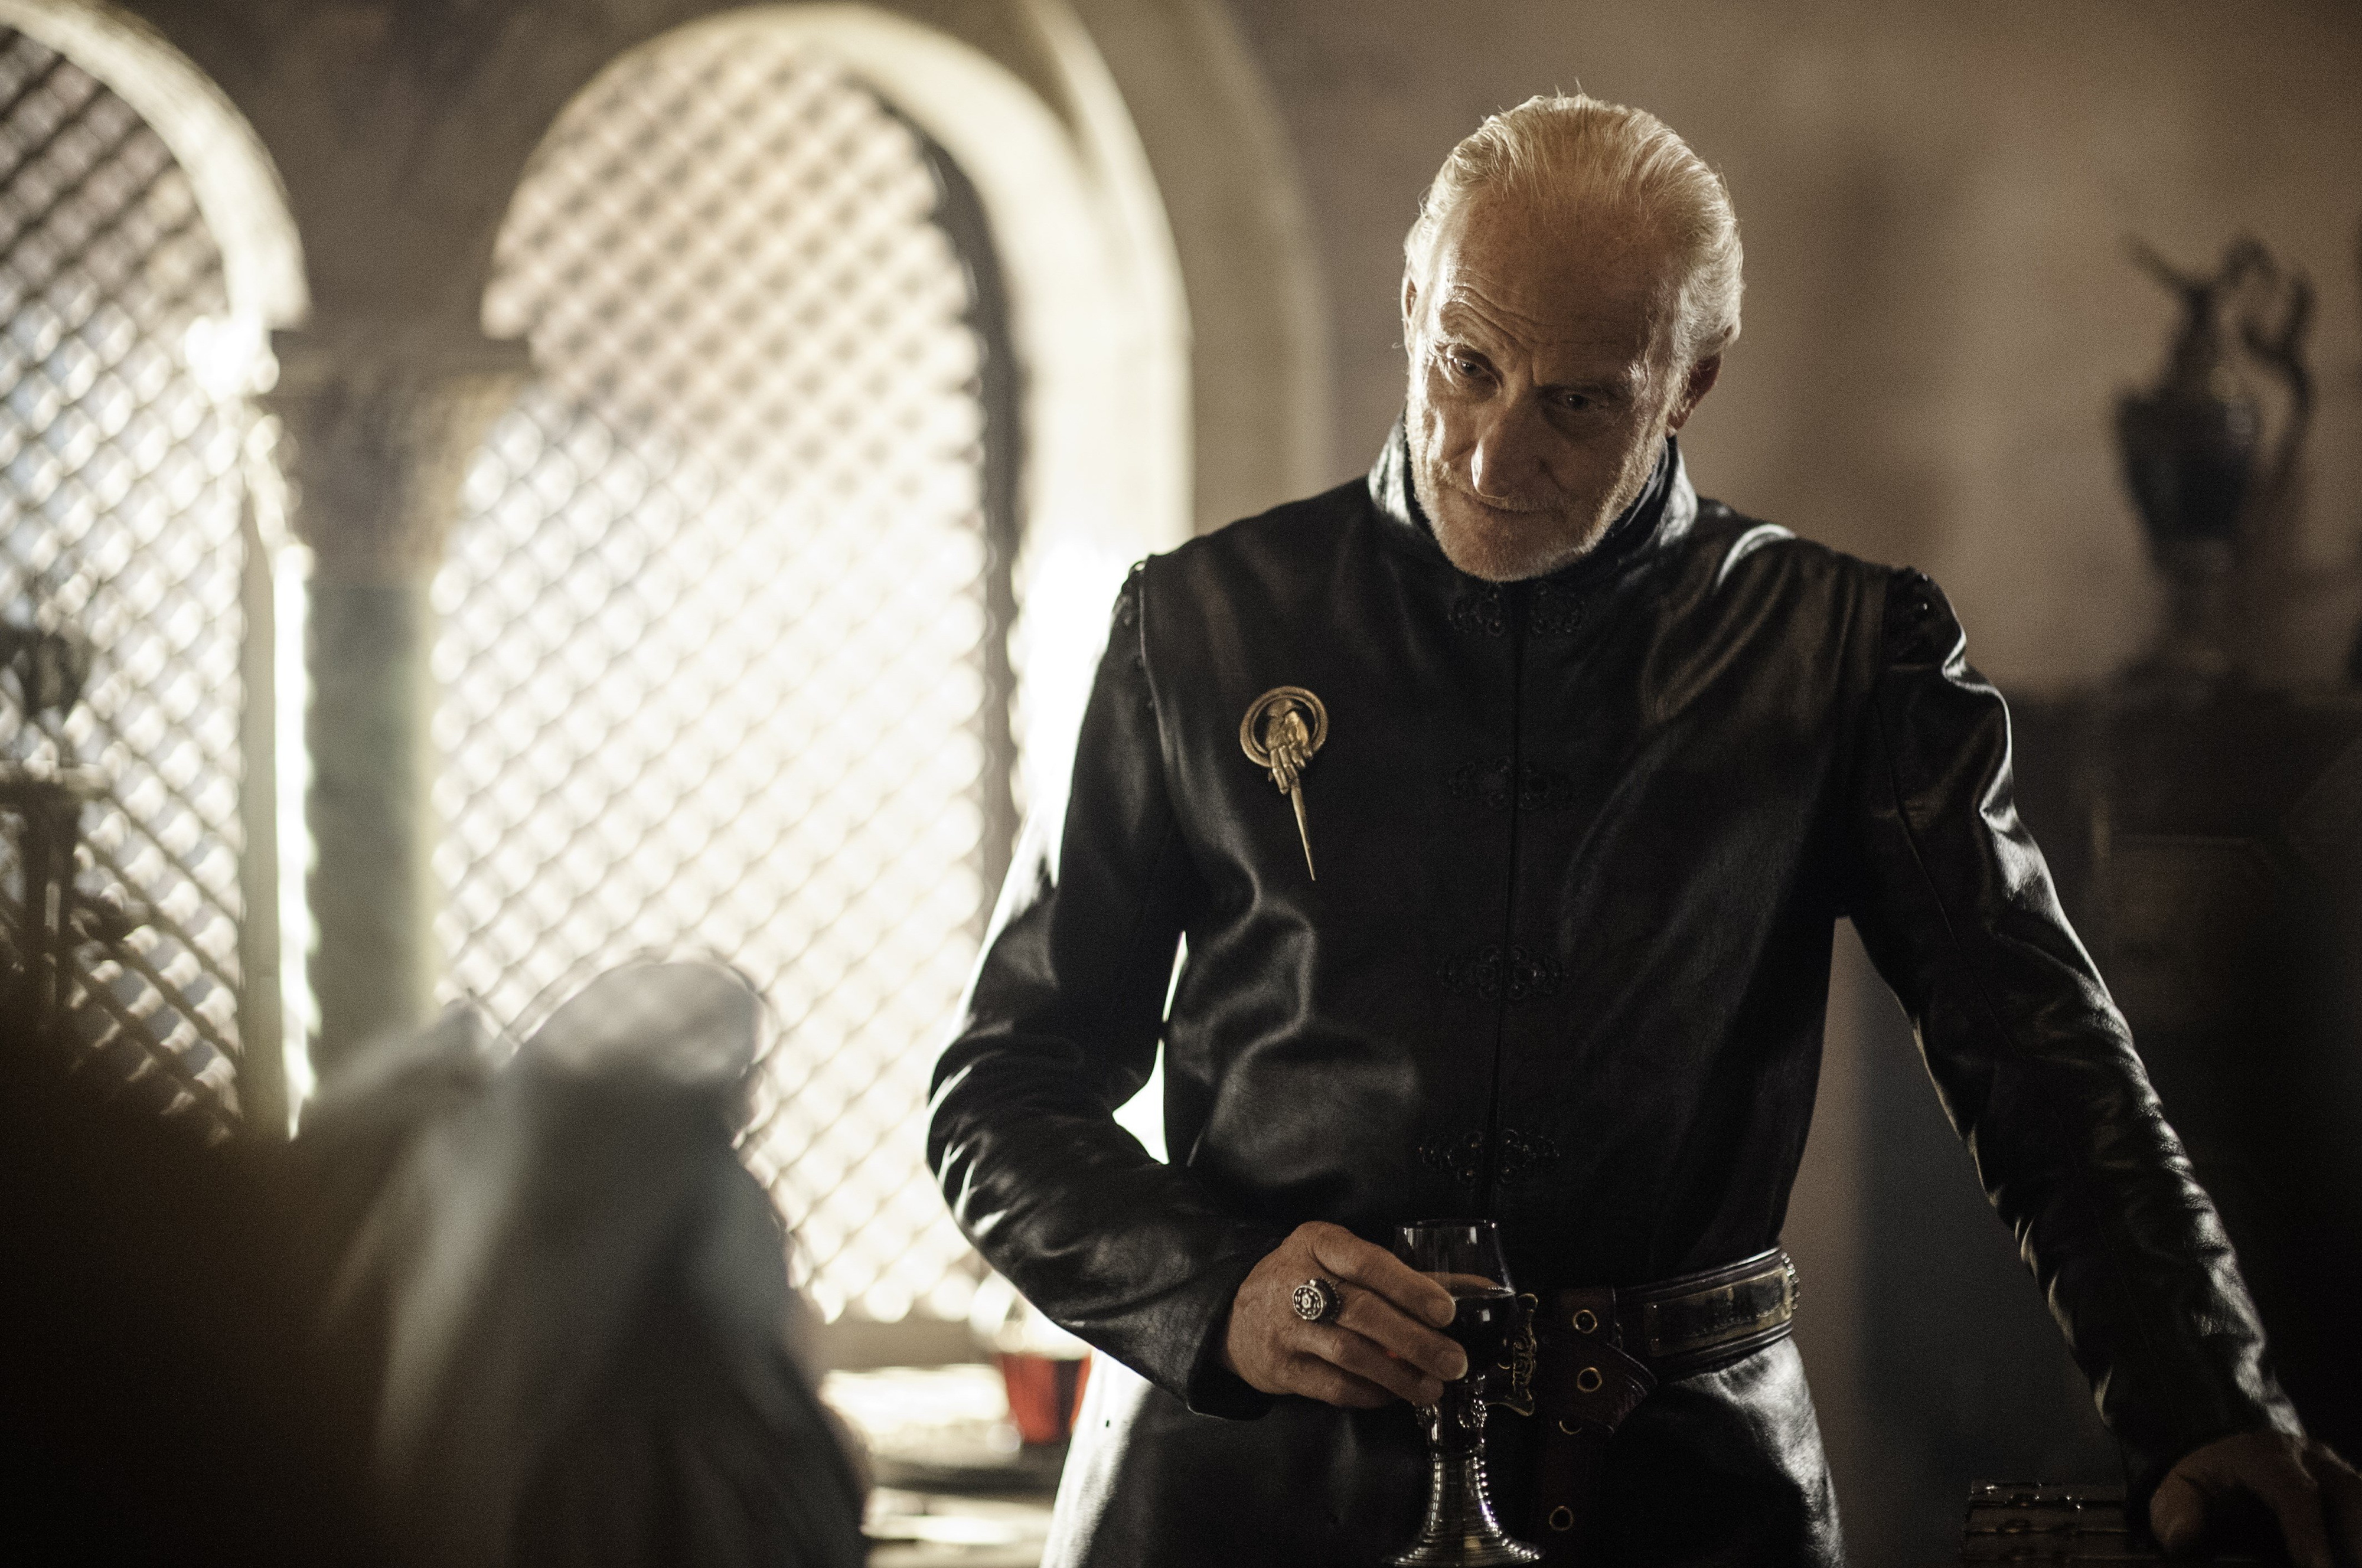 Cool Wallpapers tv show, game of thrones, charles dance, tywin lannister